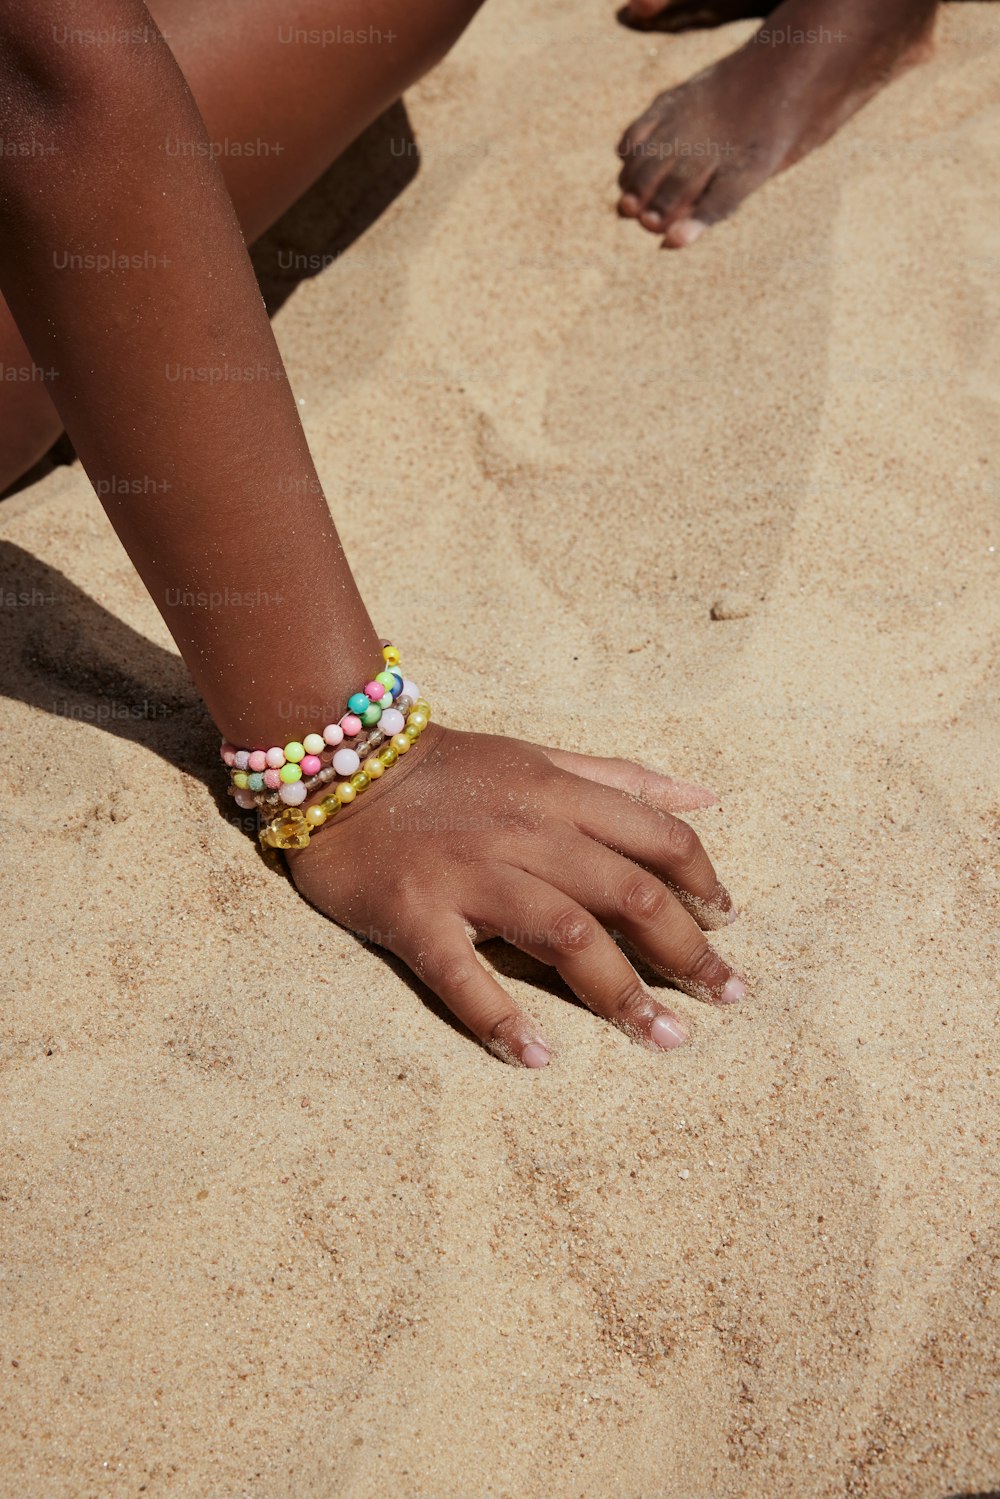 a close up of a person's hand on the sand